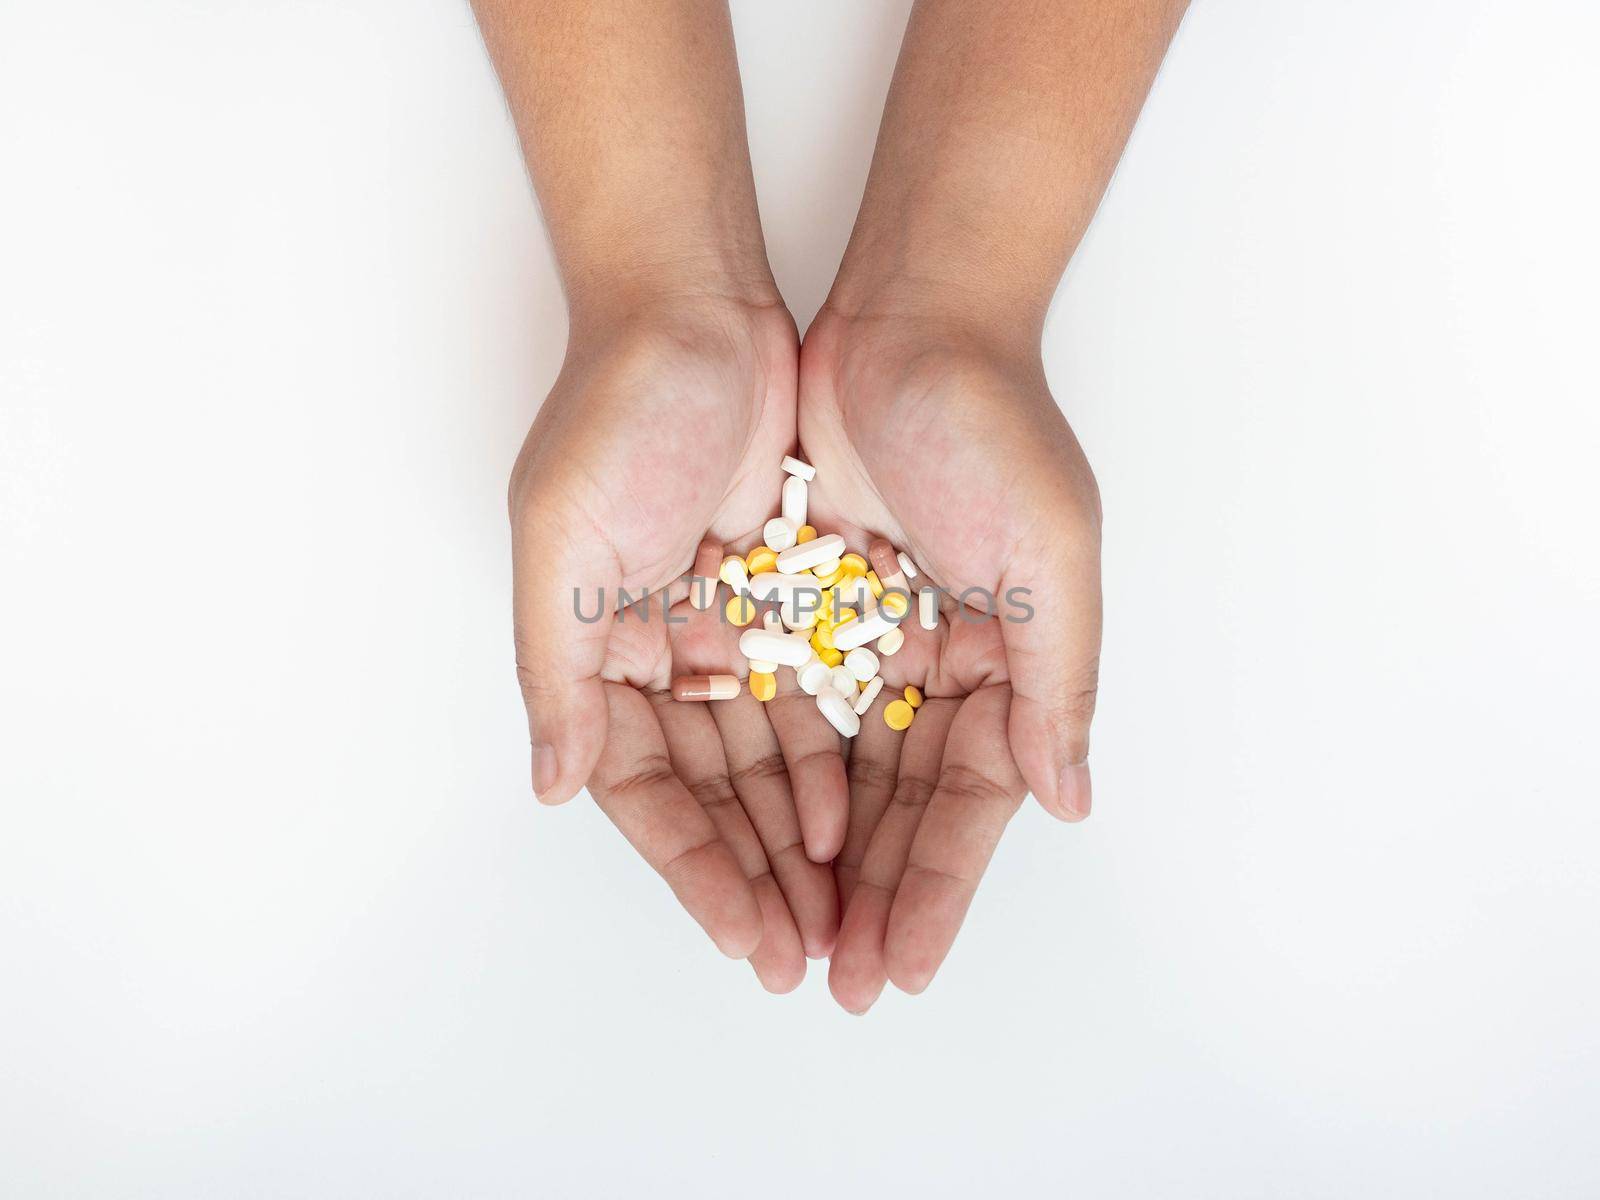 Colorful pills on hand On a white background by Kulpreya